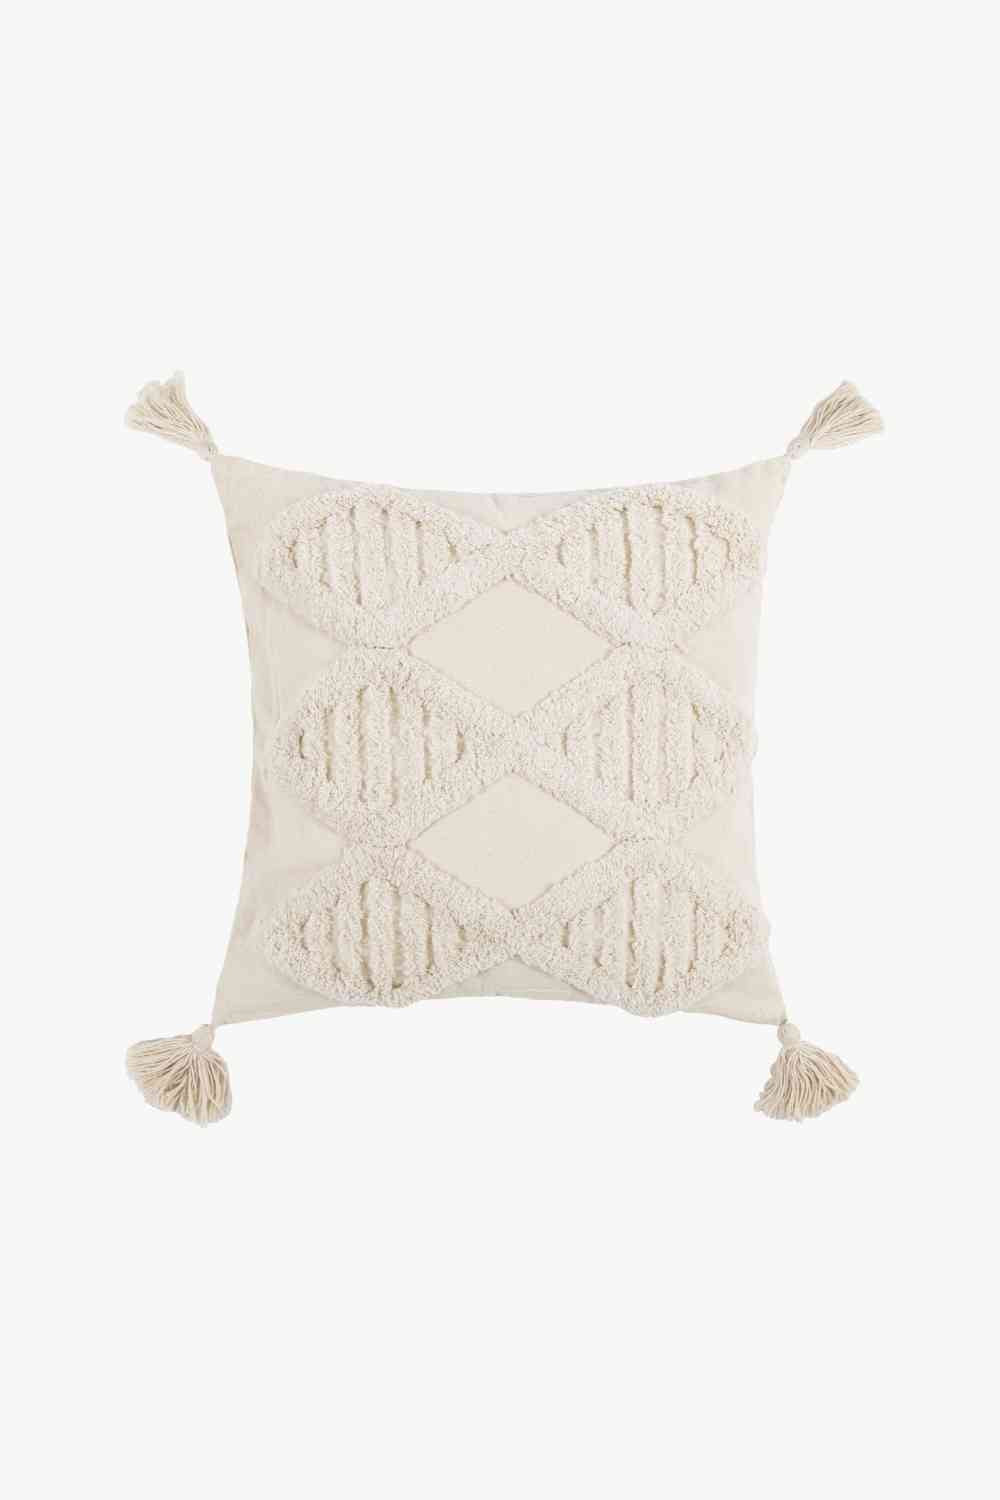 Fringe Decorative Throw Pillow Case - Decorative Pillowcases - Tophatter's Smashing Daily Deals | We're Against Forced Labor in China